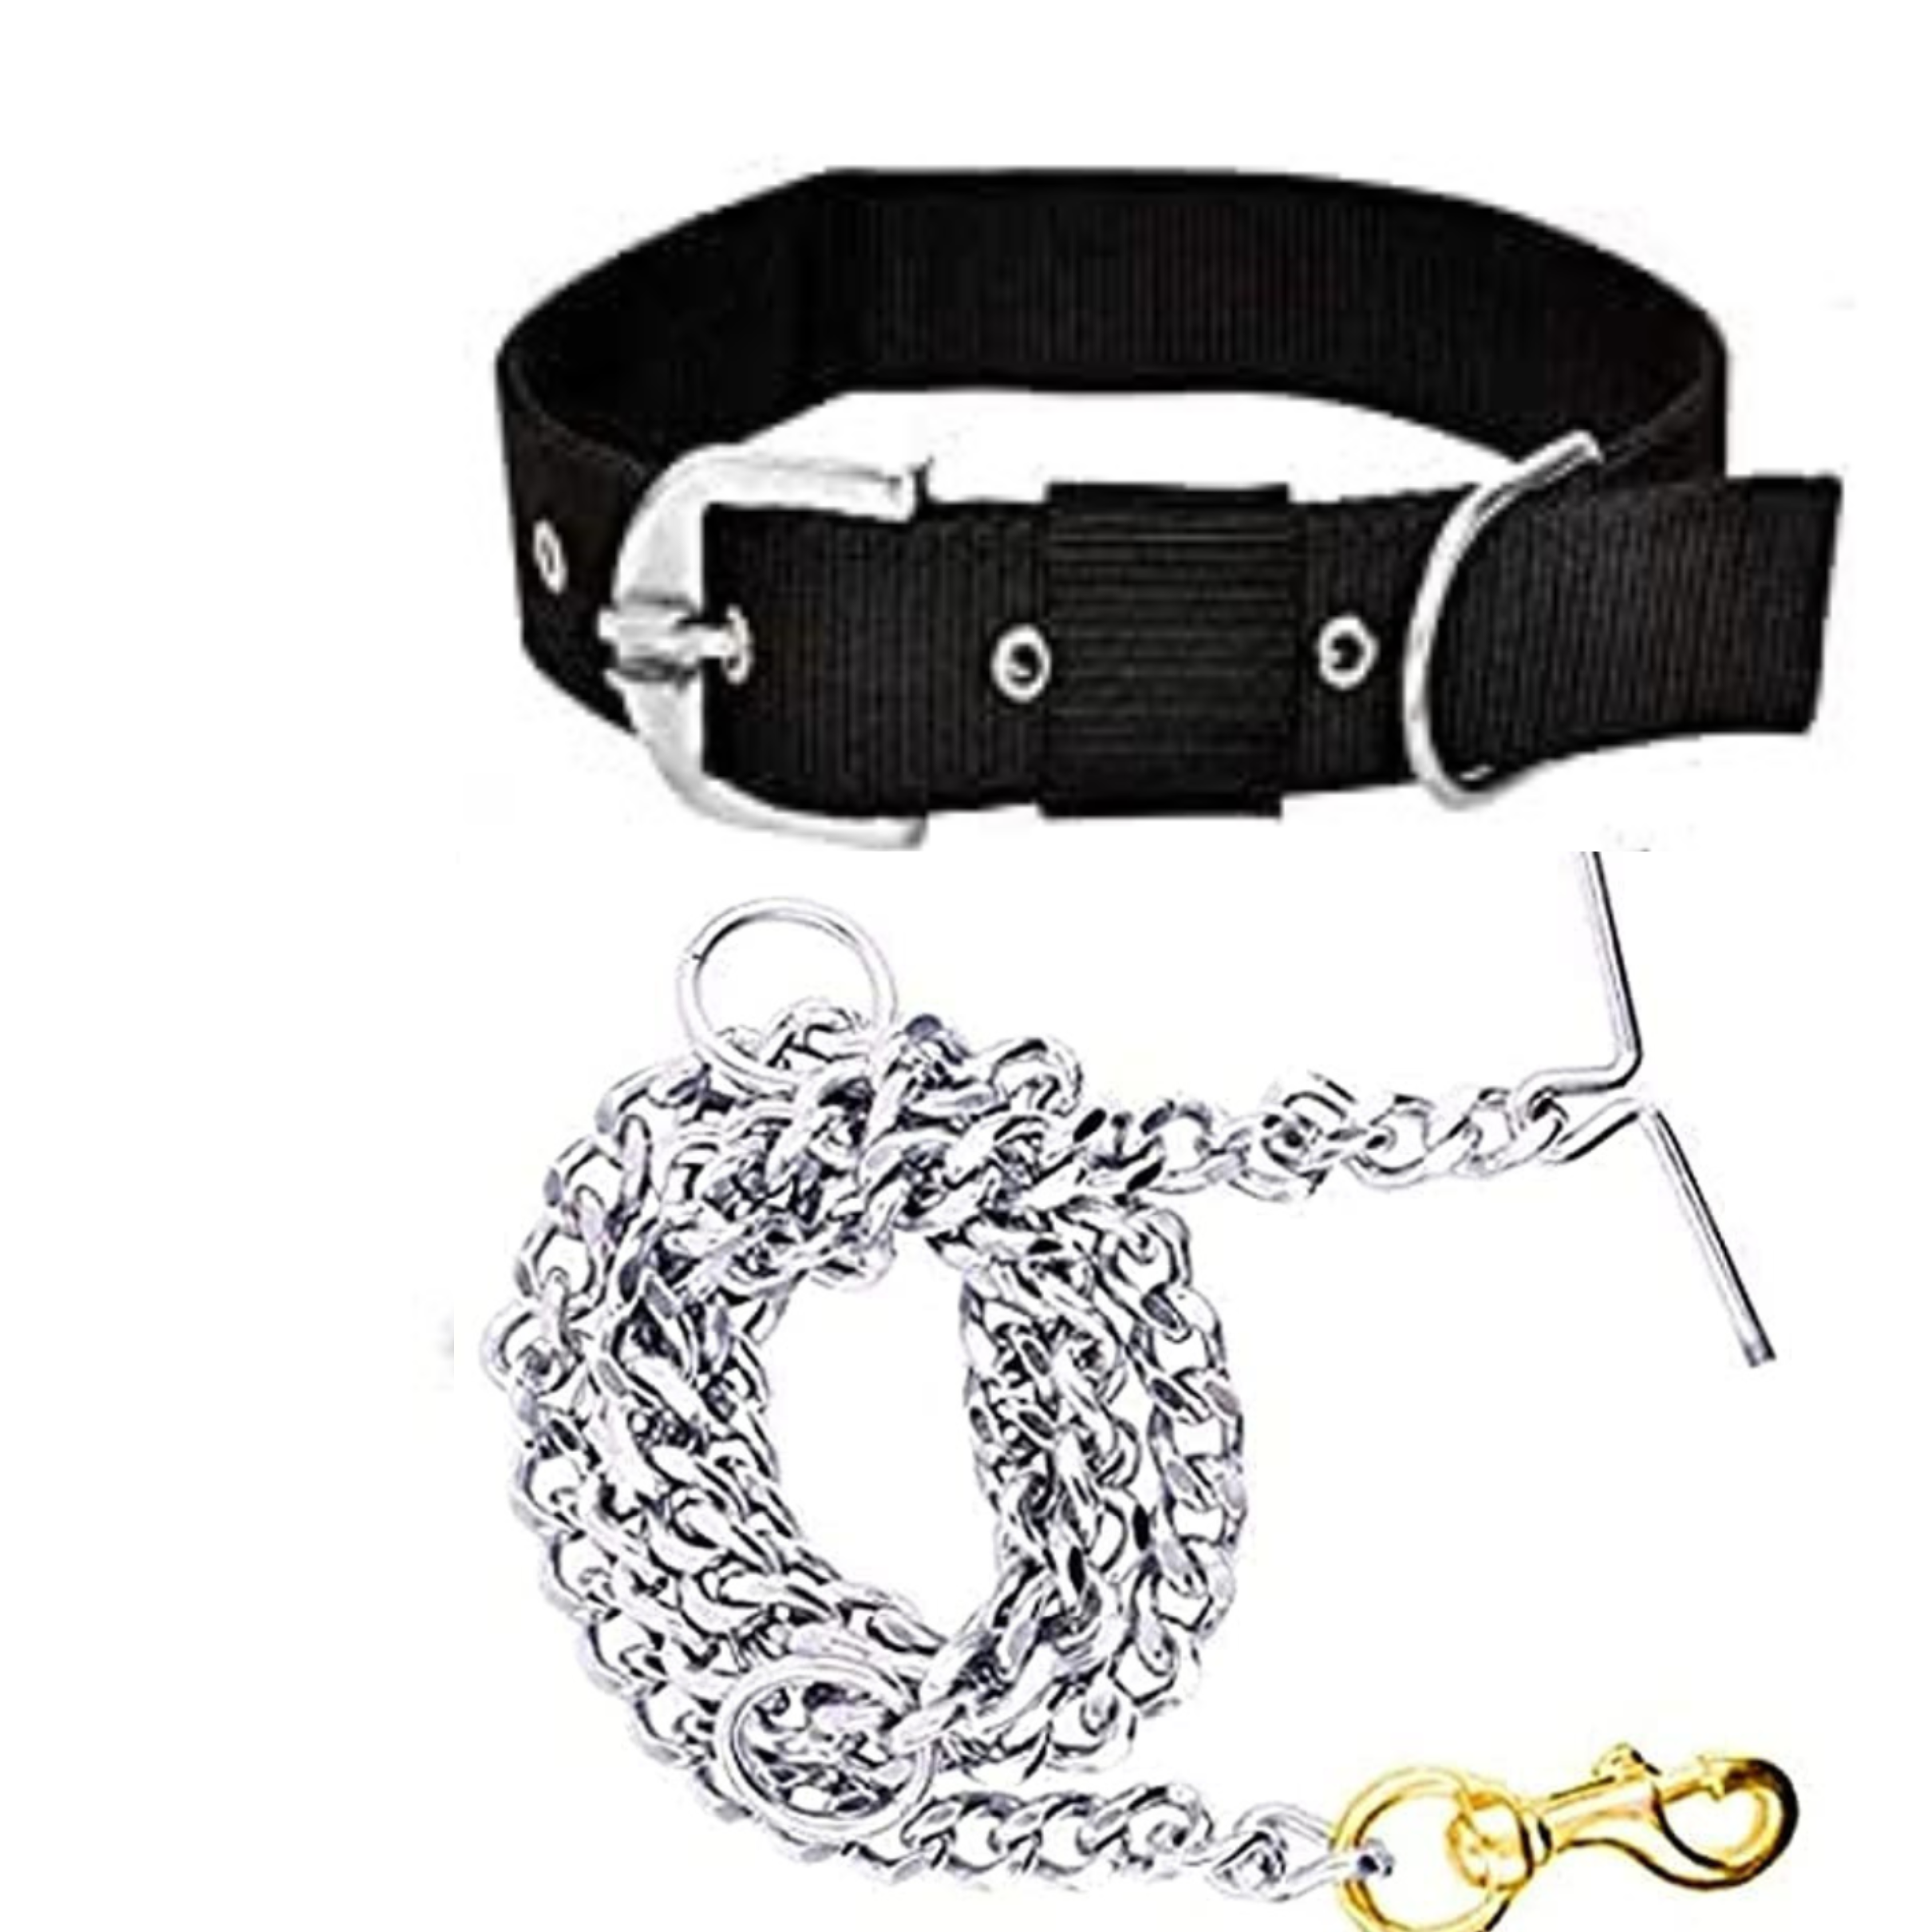 Set of Grinded Dog Chain Leash with Brass Hook + Nylon Dog Collar.